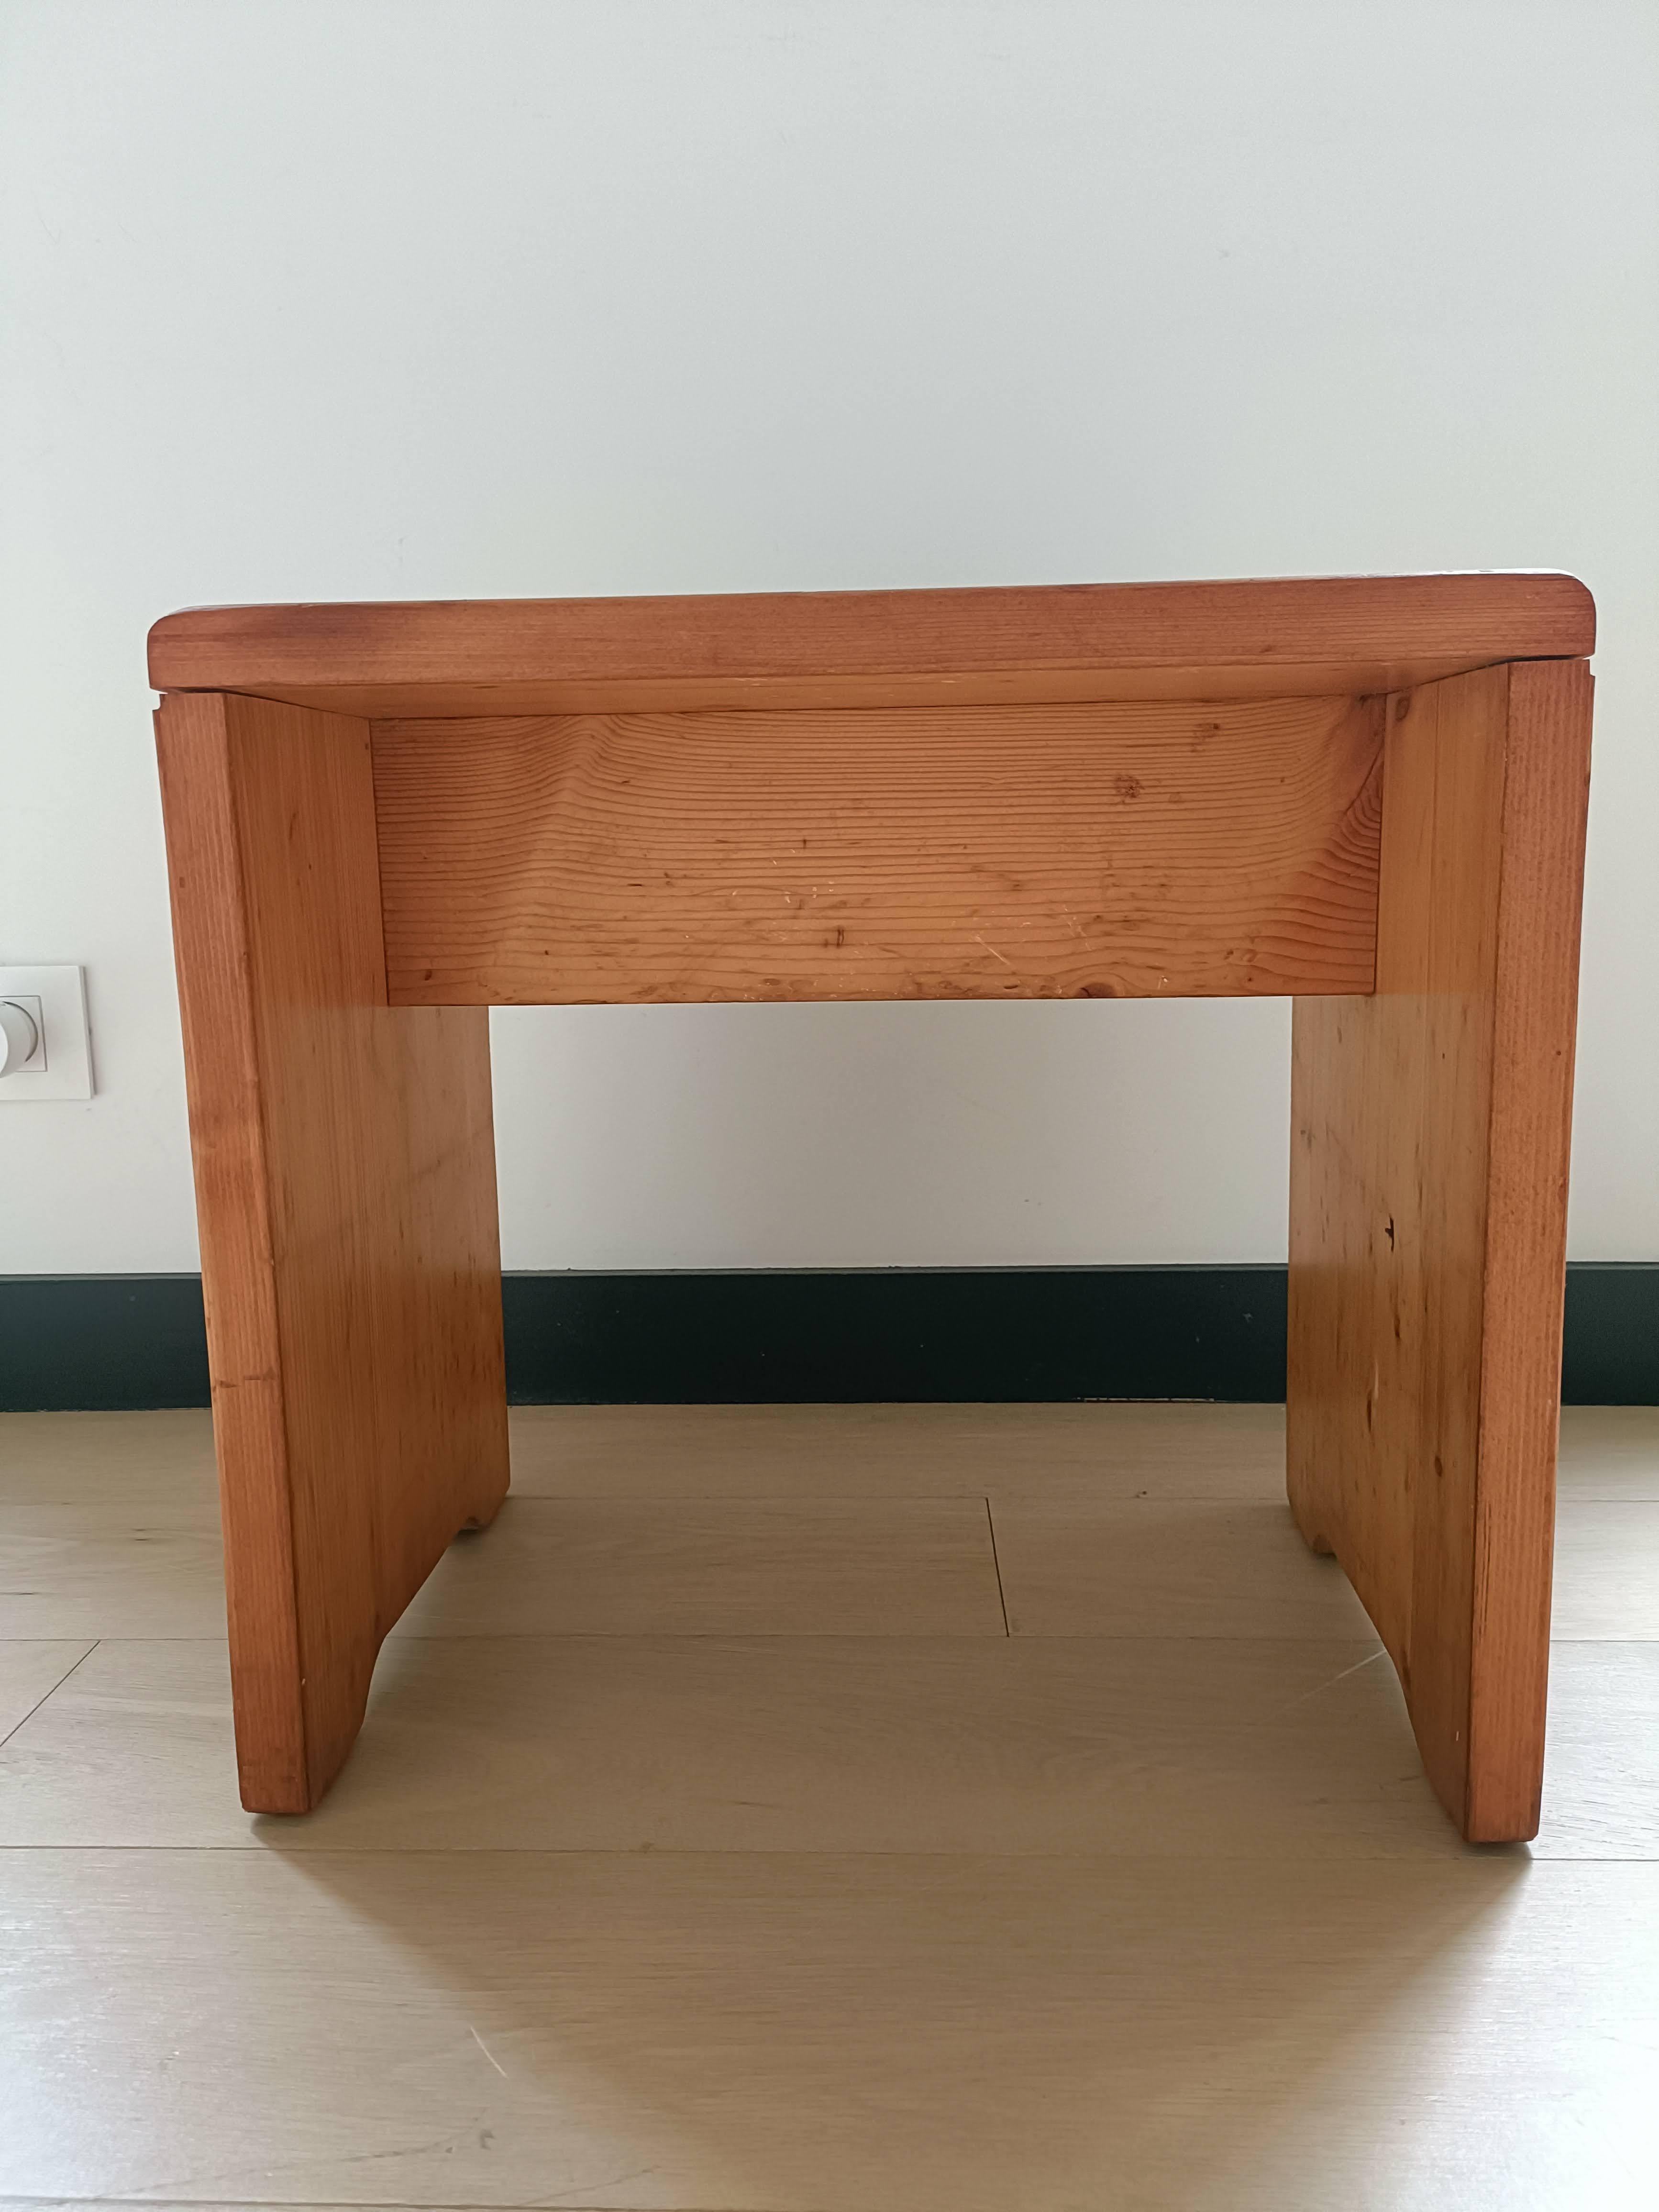 Perriand Pine Wood Stool Charlotte Perriand Pierre Et Vacances Les Arcs, 1800 In Fair Condition For Sale In Paris, FR